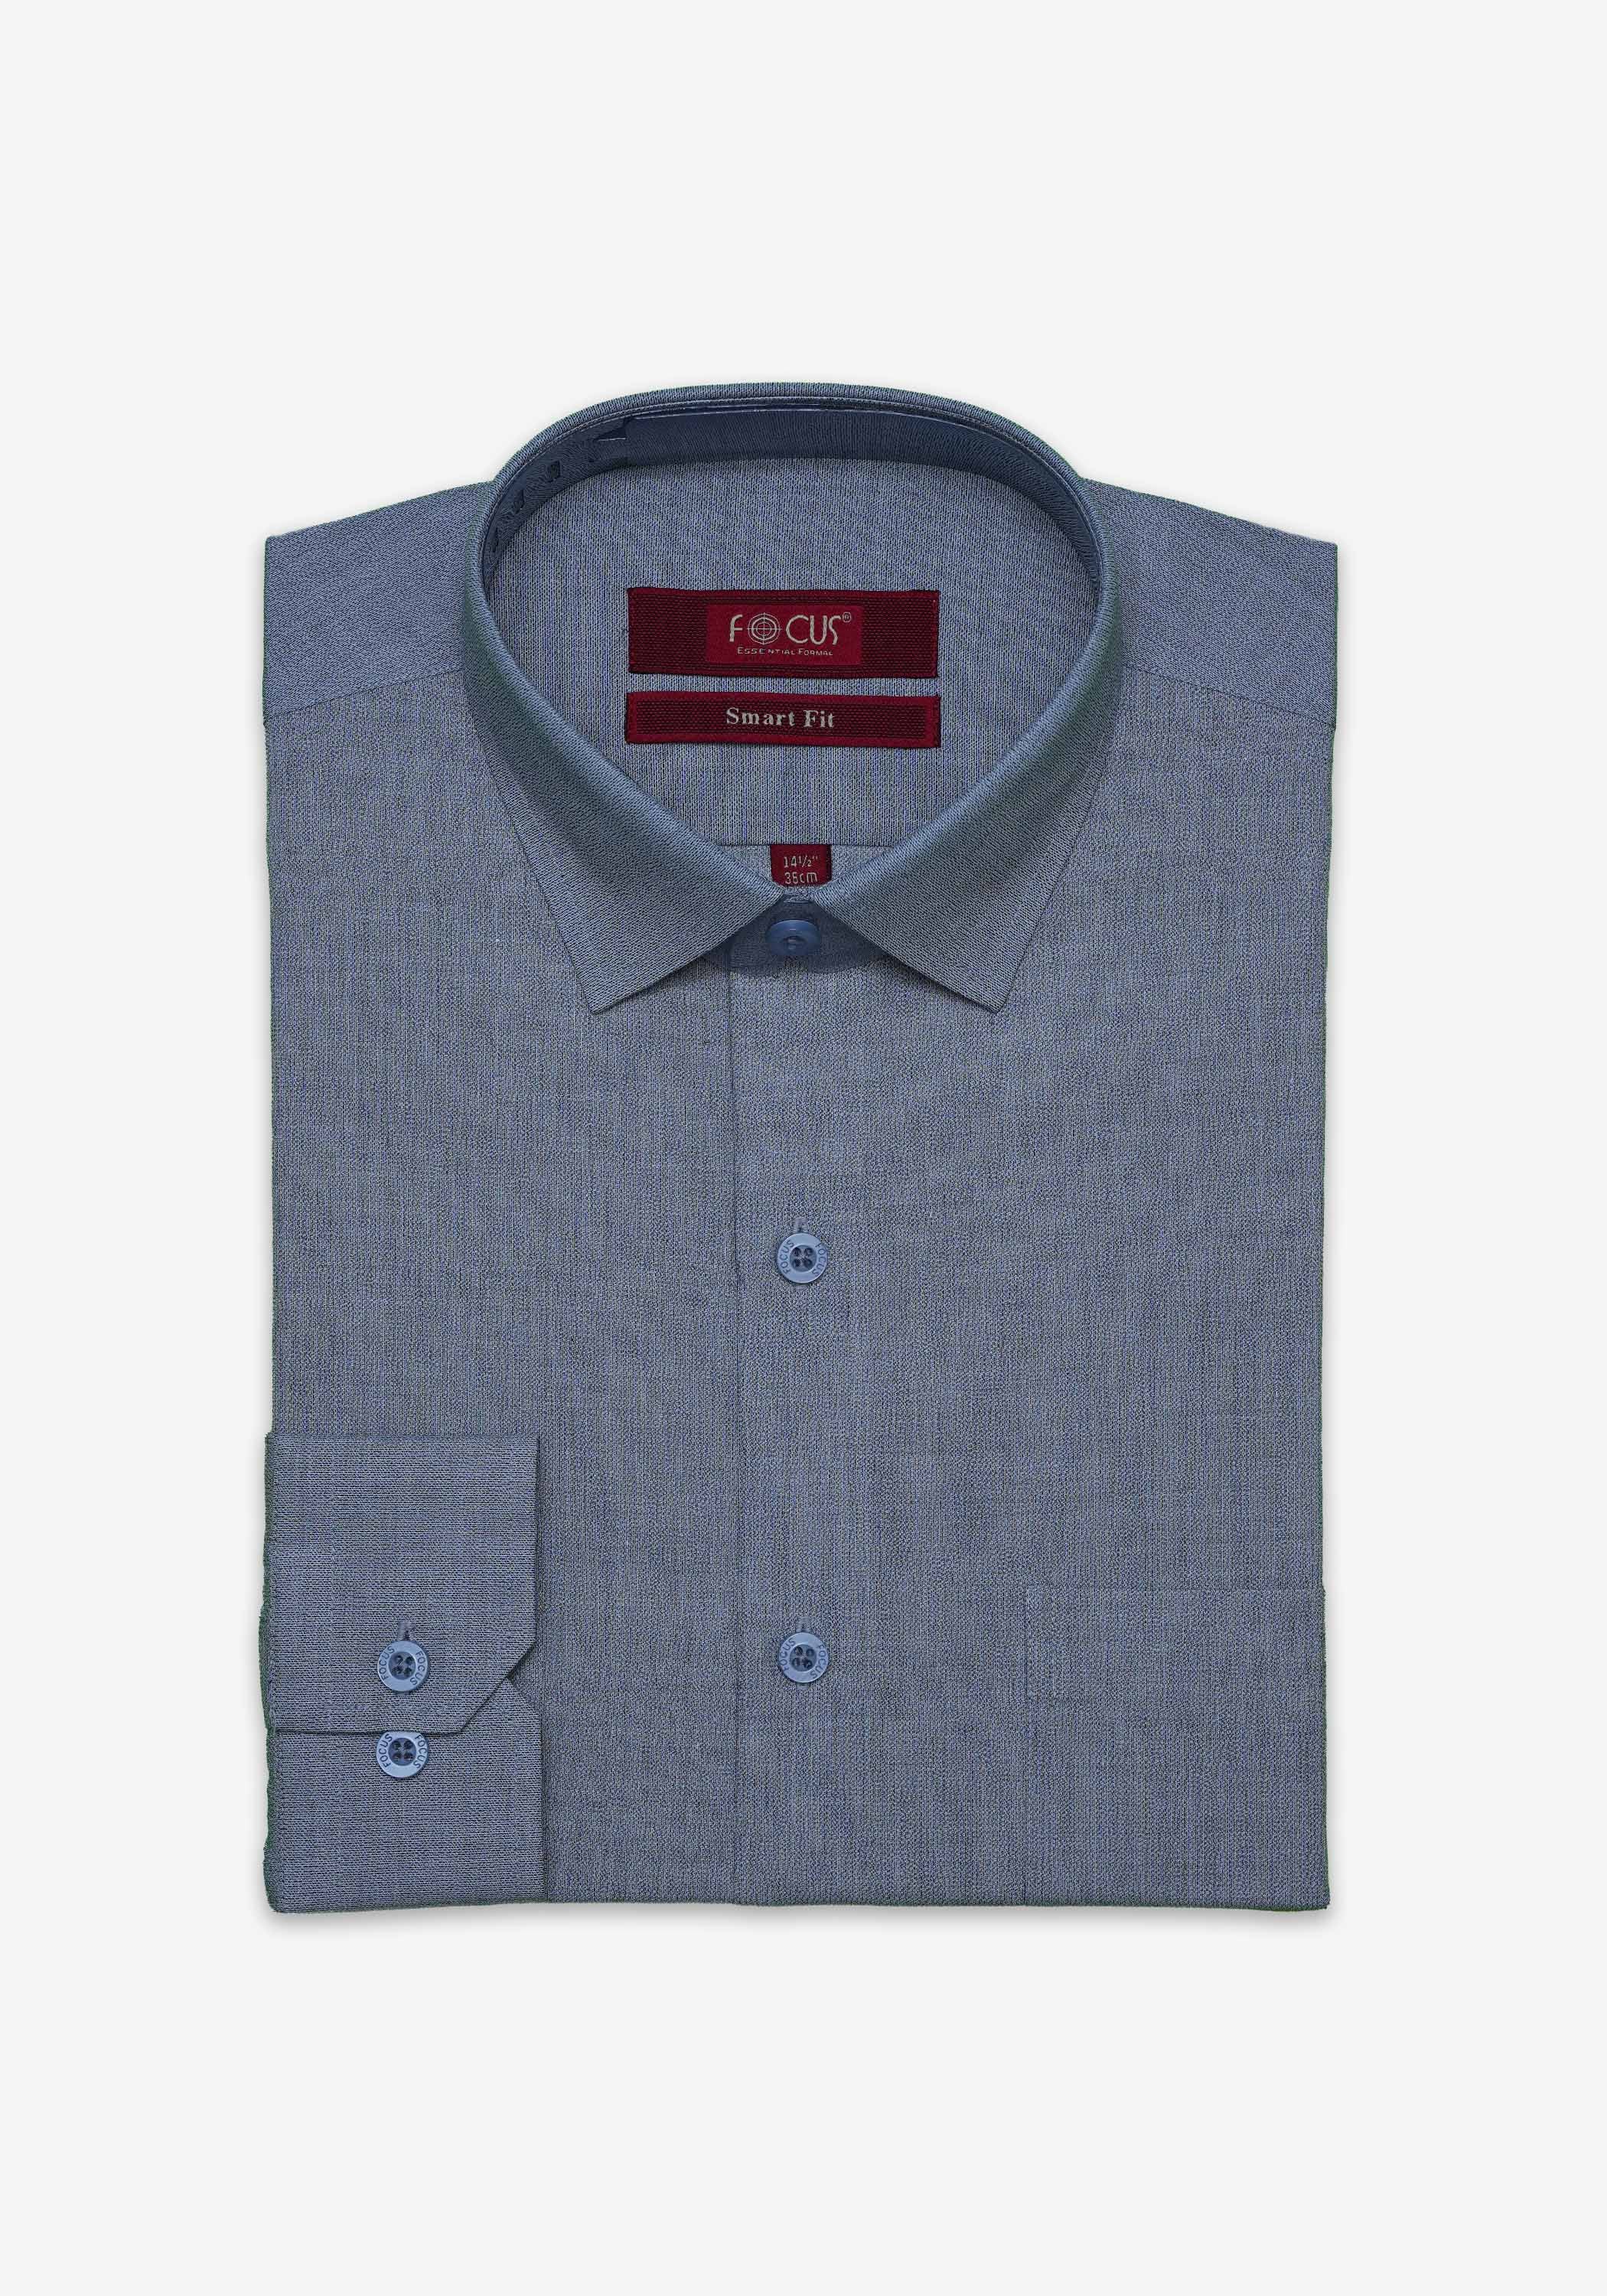 casual shirts for men in pakistan